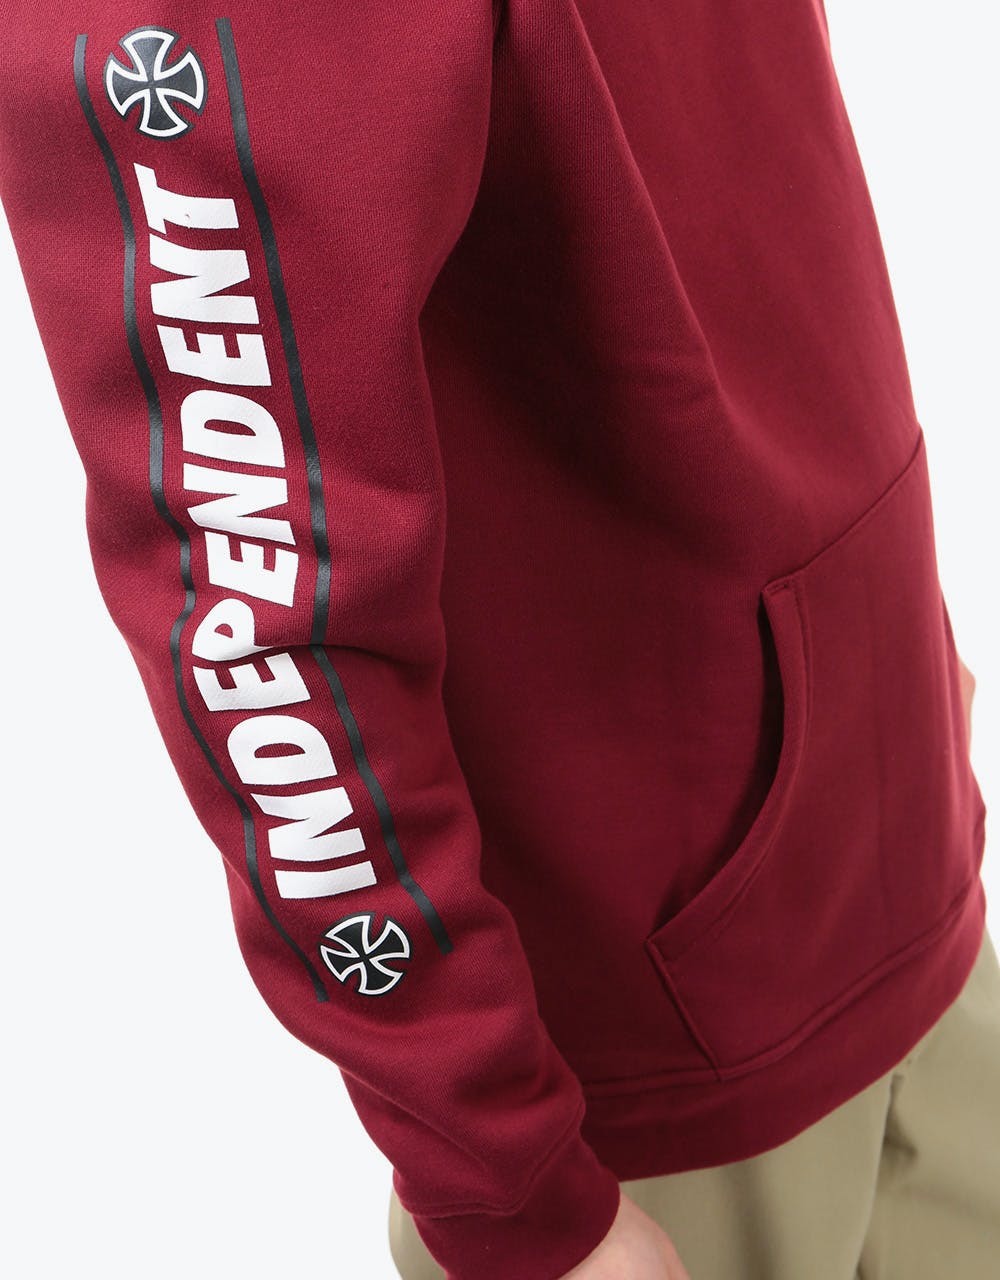 Independent Shear Pullover Hoodie - Burgundy